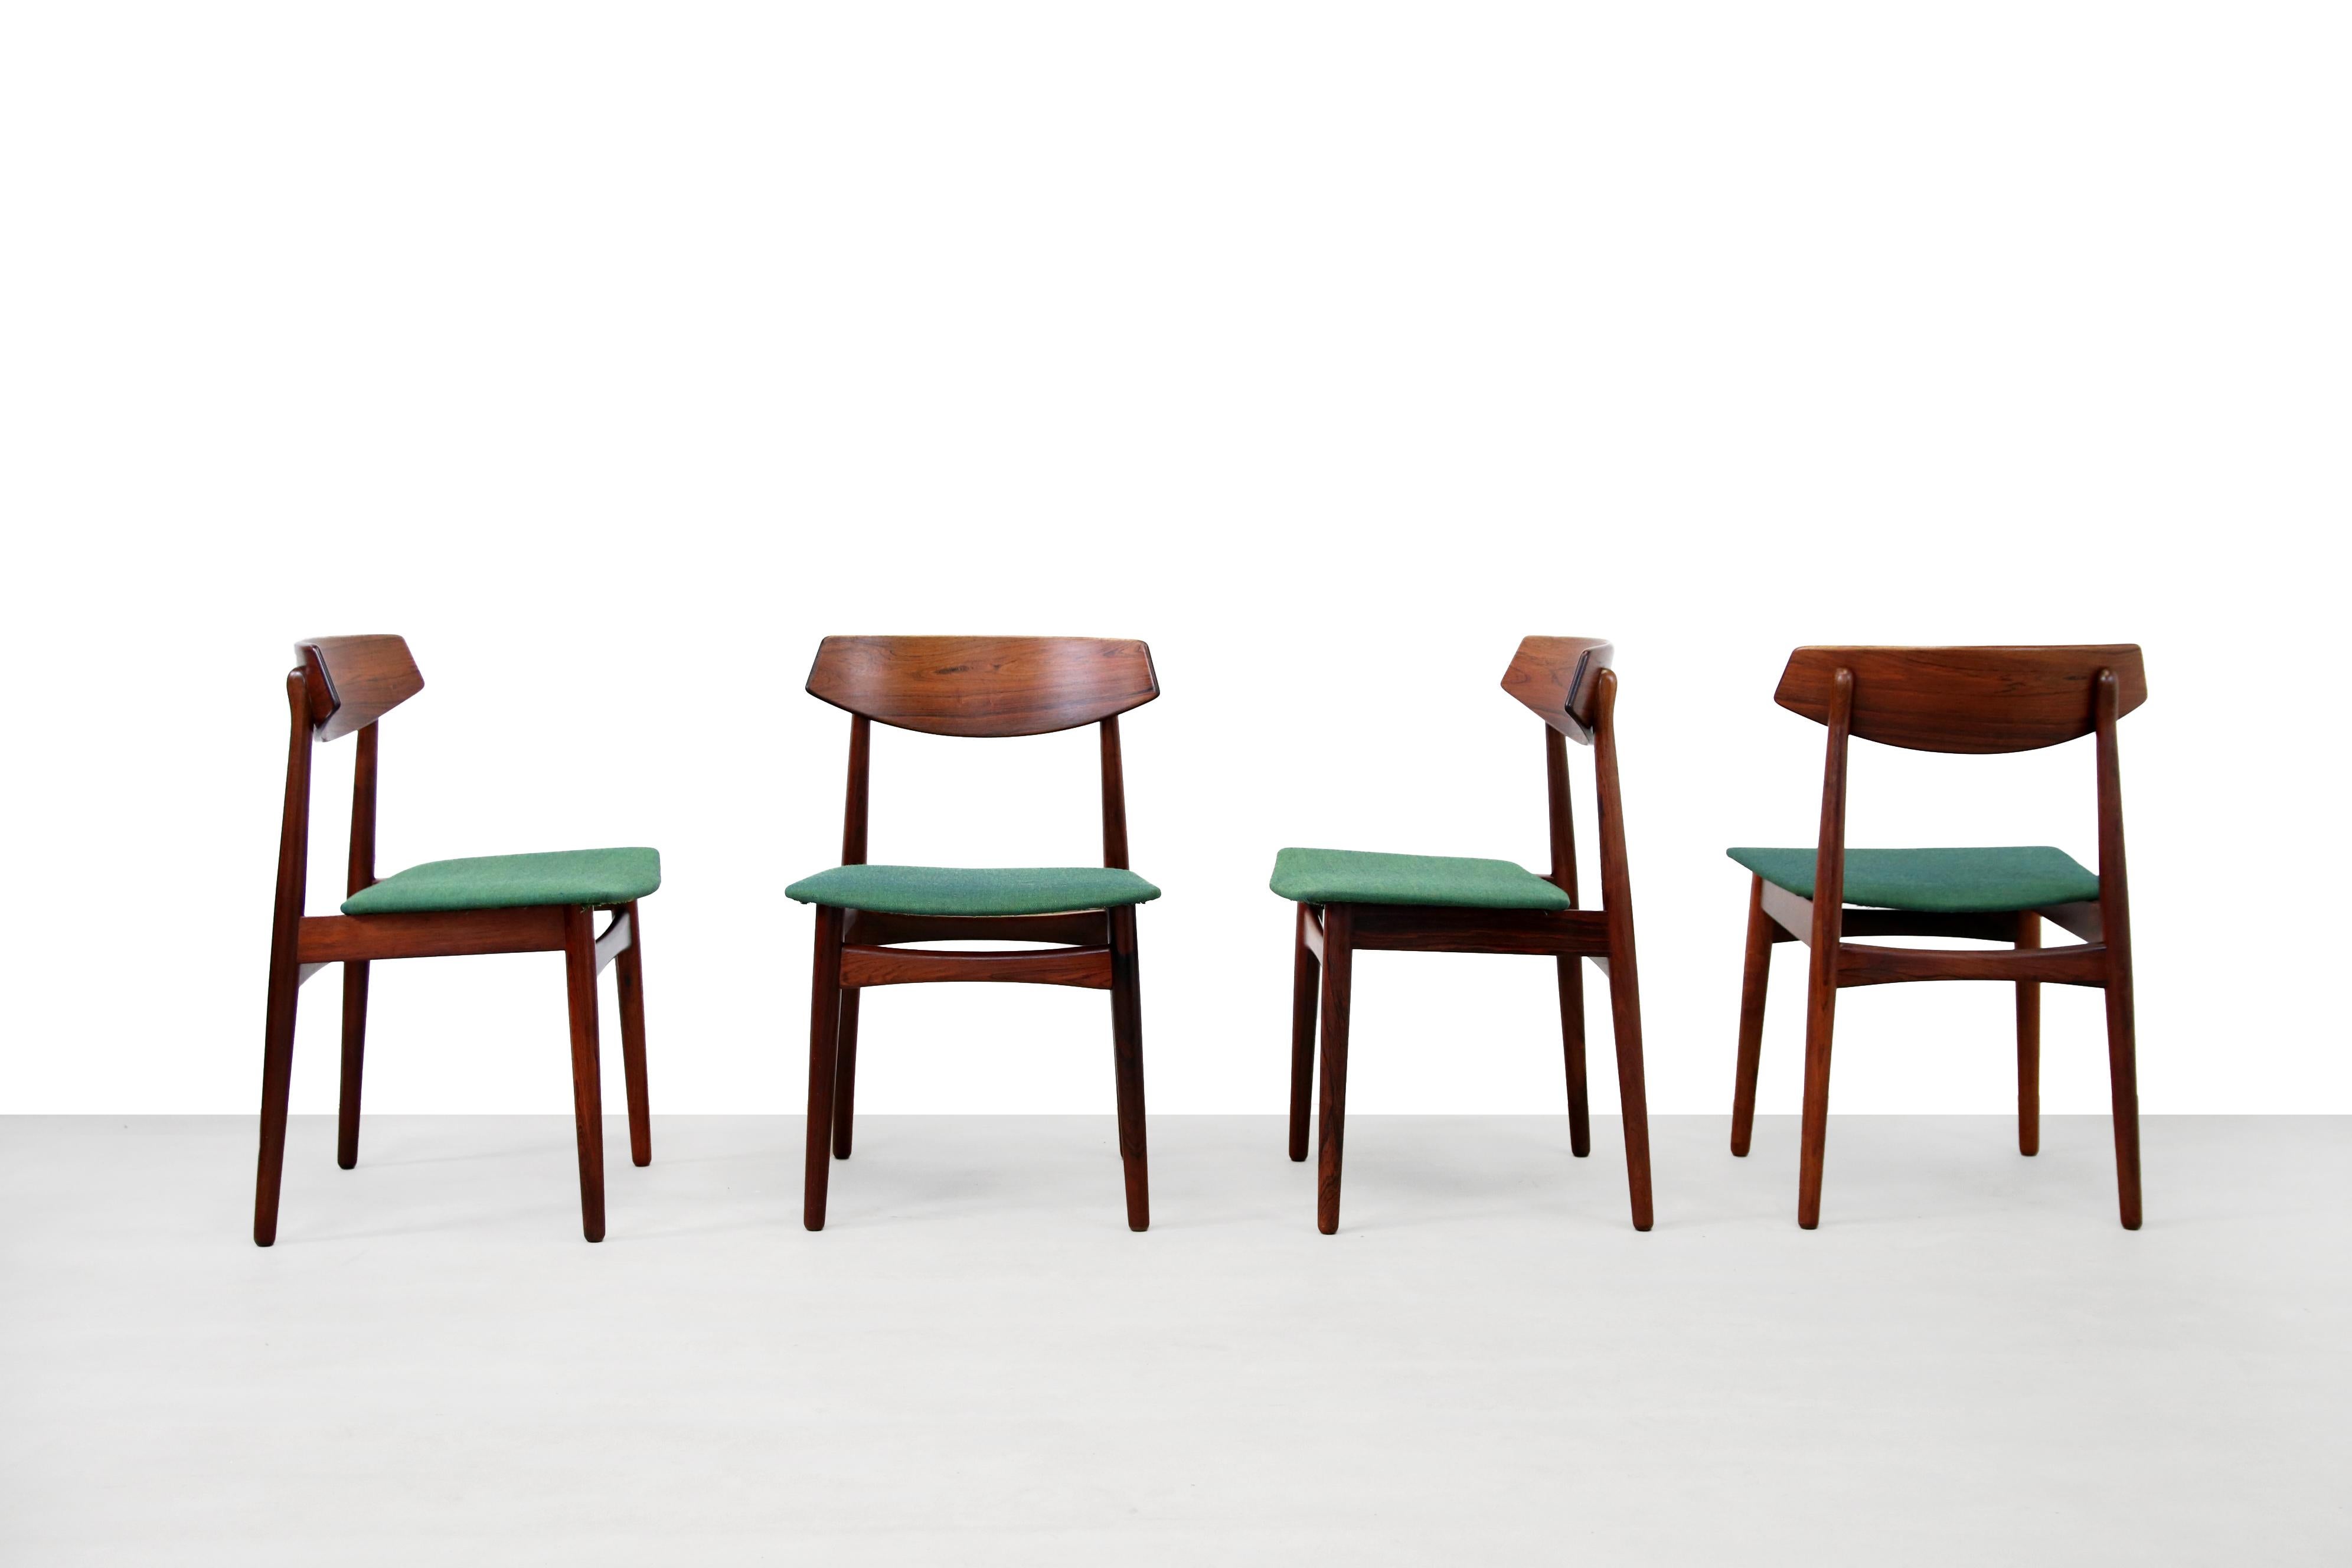 A very nice set of four vintage Danish design chairs, produced by Skovby Mobler. This set has been reupholstered in a green square remix 3 (color 982) by Kvadrat, which colors beautifully with the dark tropical hard wood. The craftsmanship is